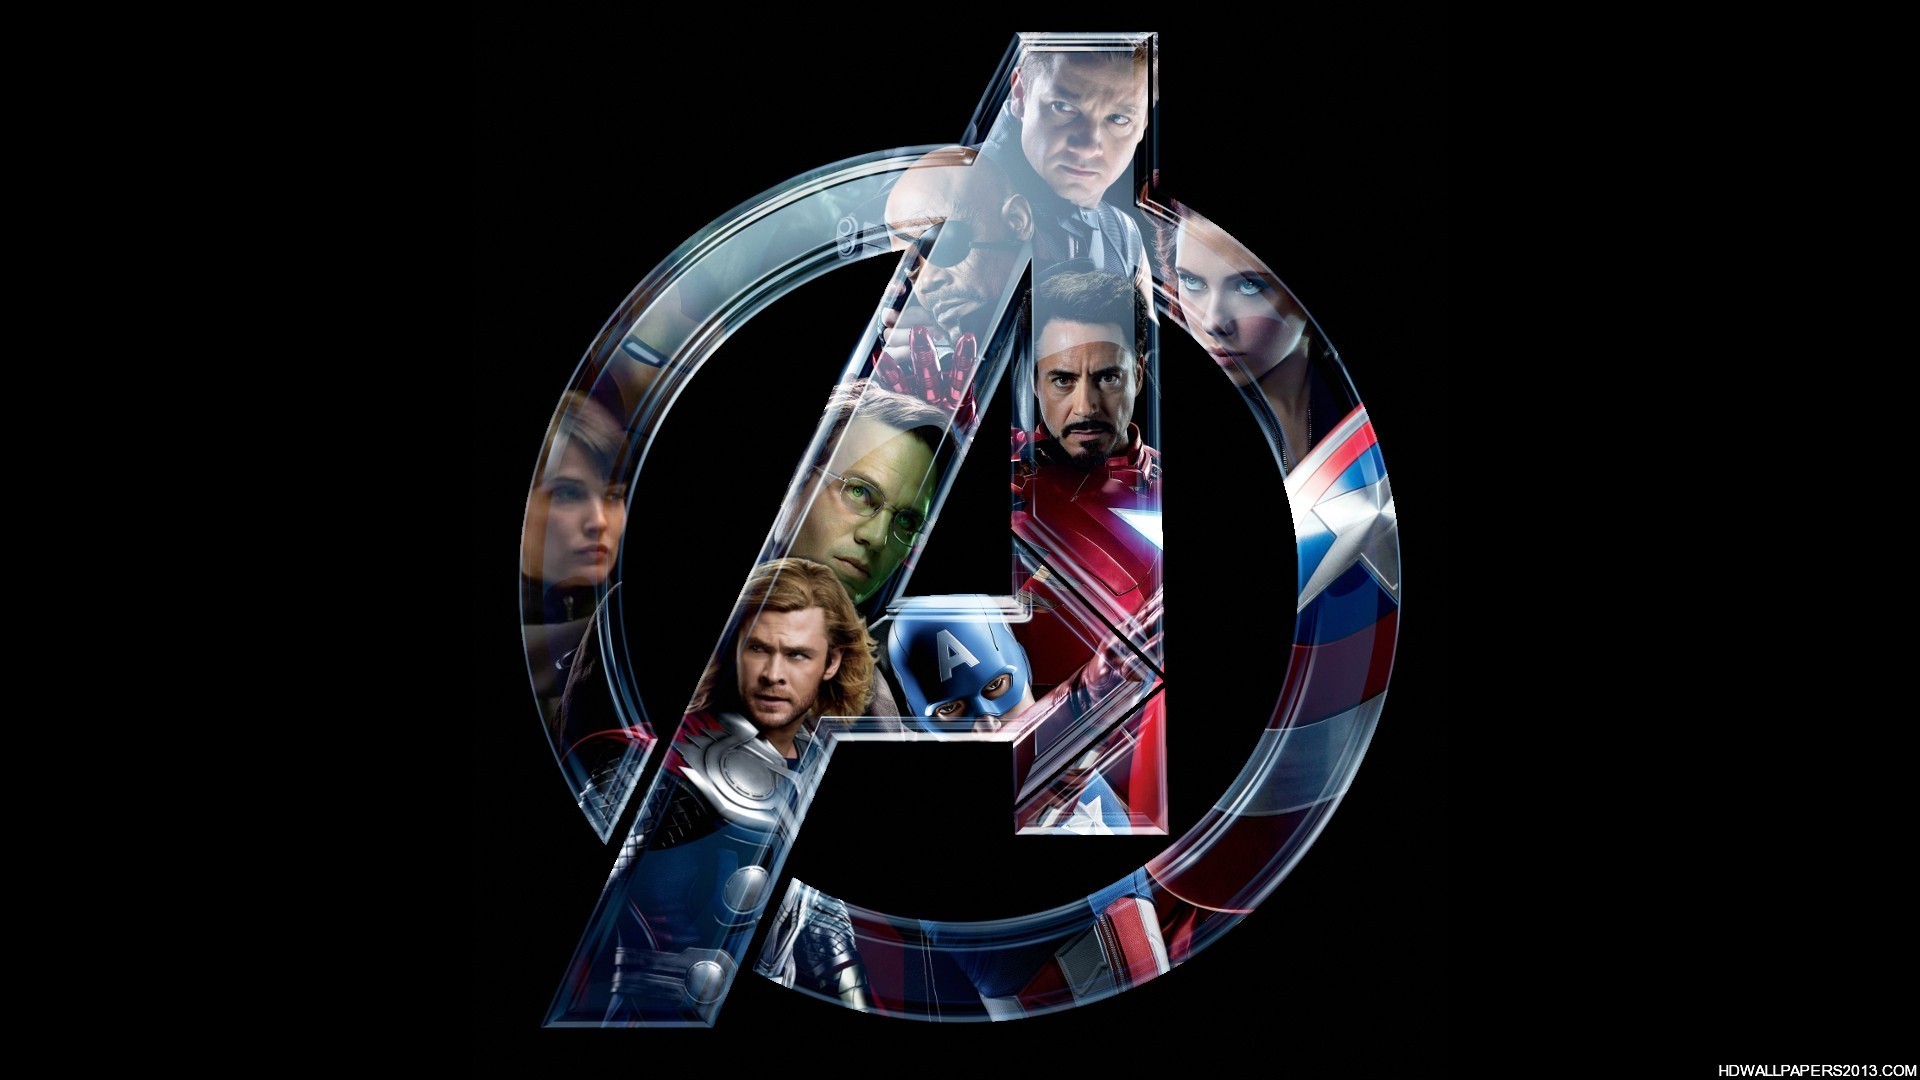 Cool Avengers wallpapers HD free   418299